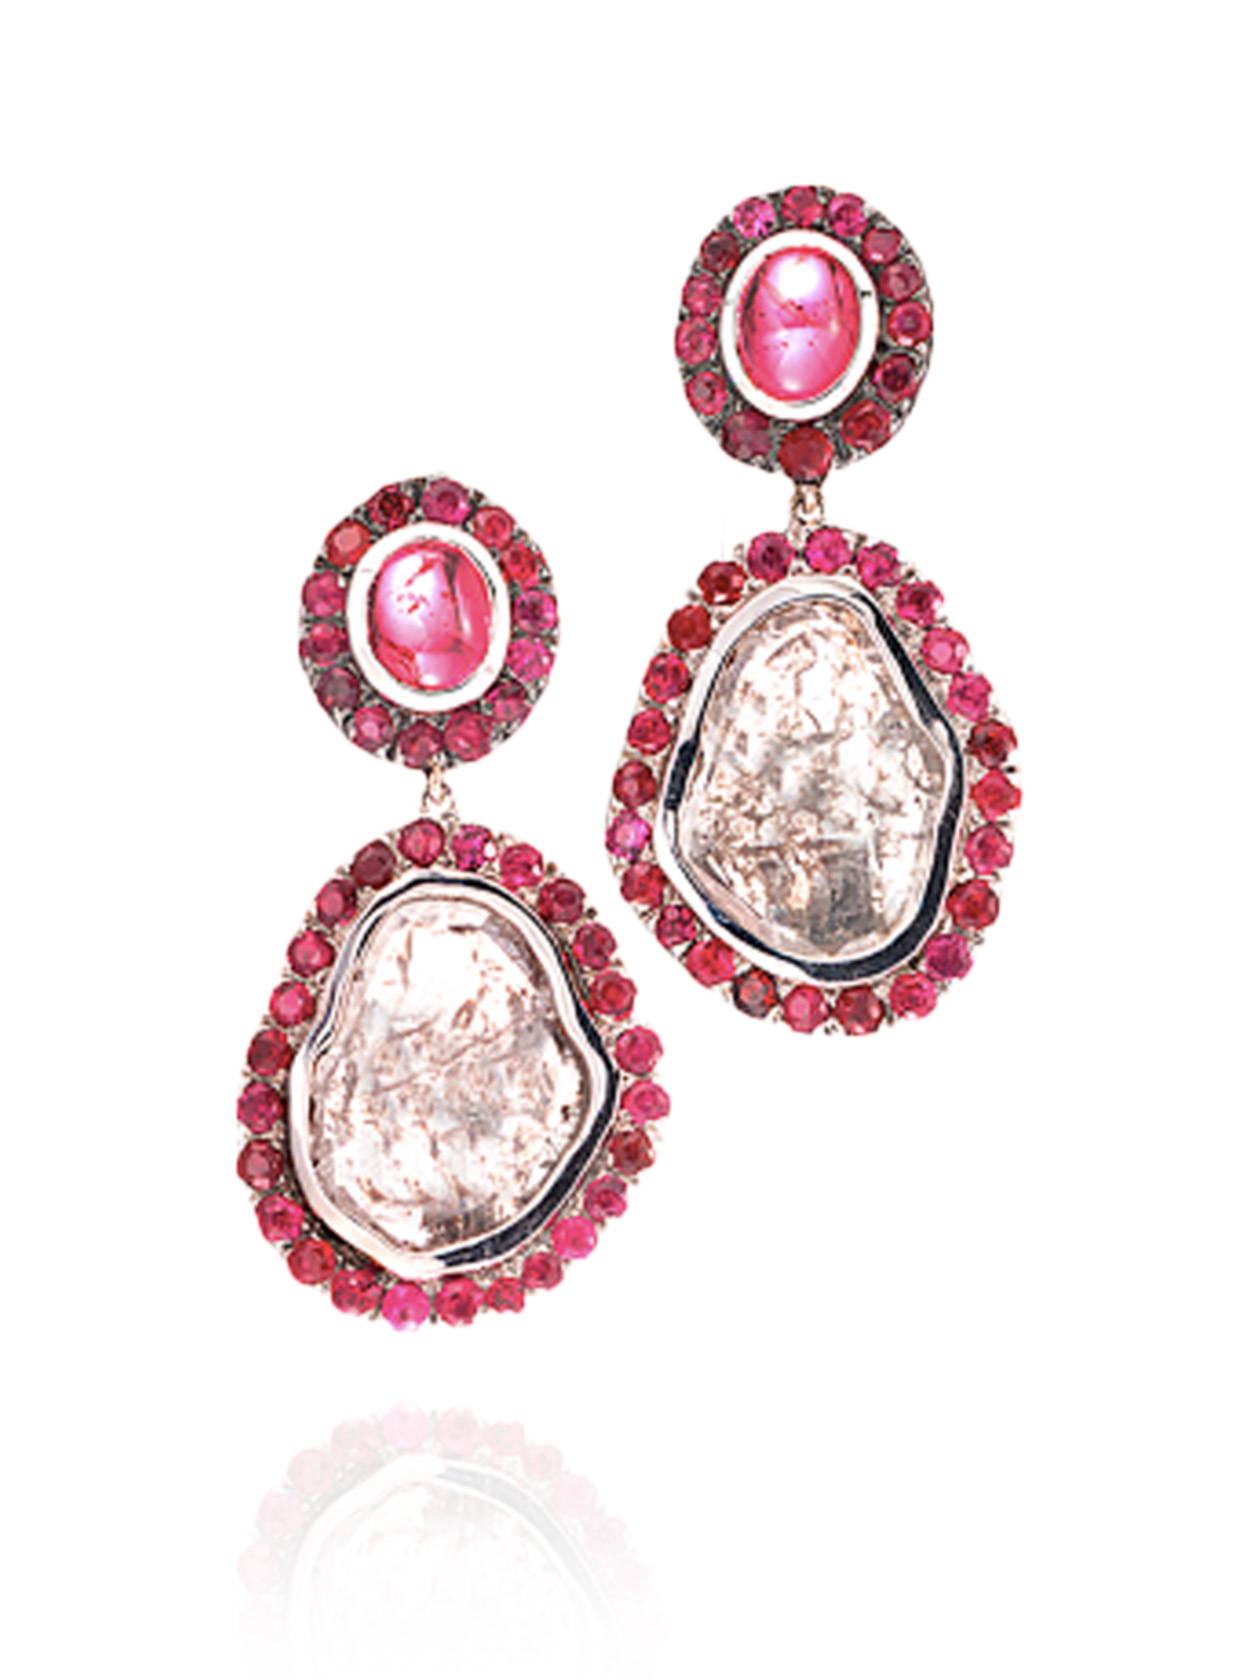 Diamond Slice, Spinel, and Ruby Earrings